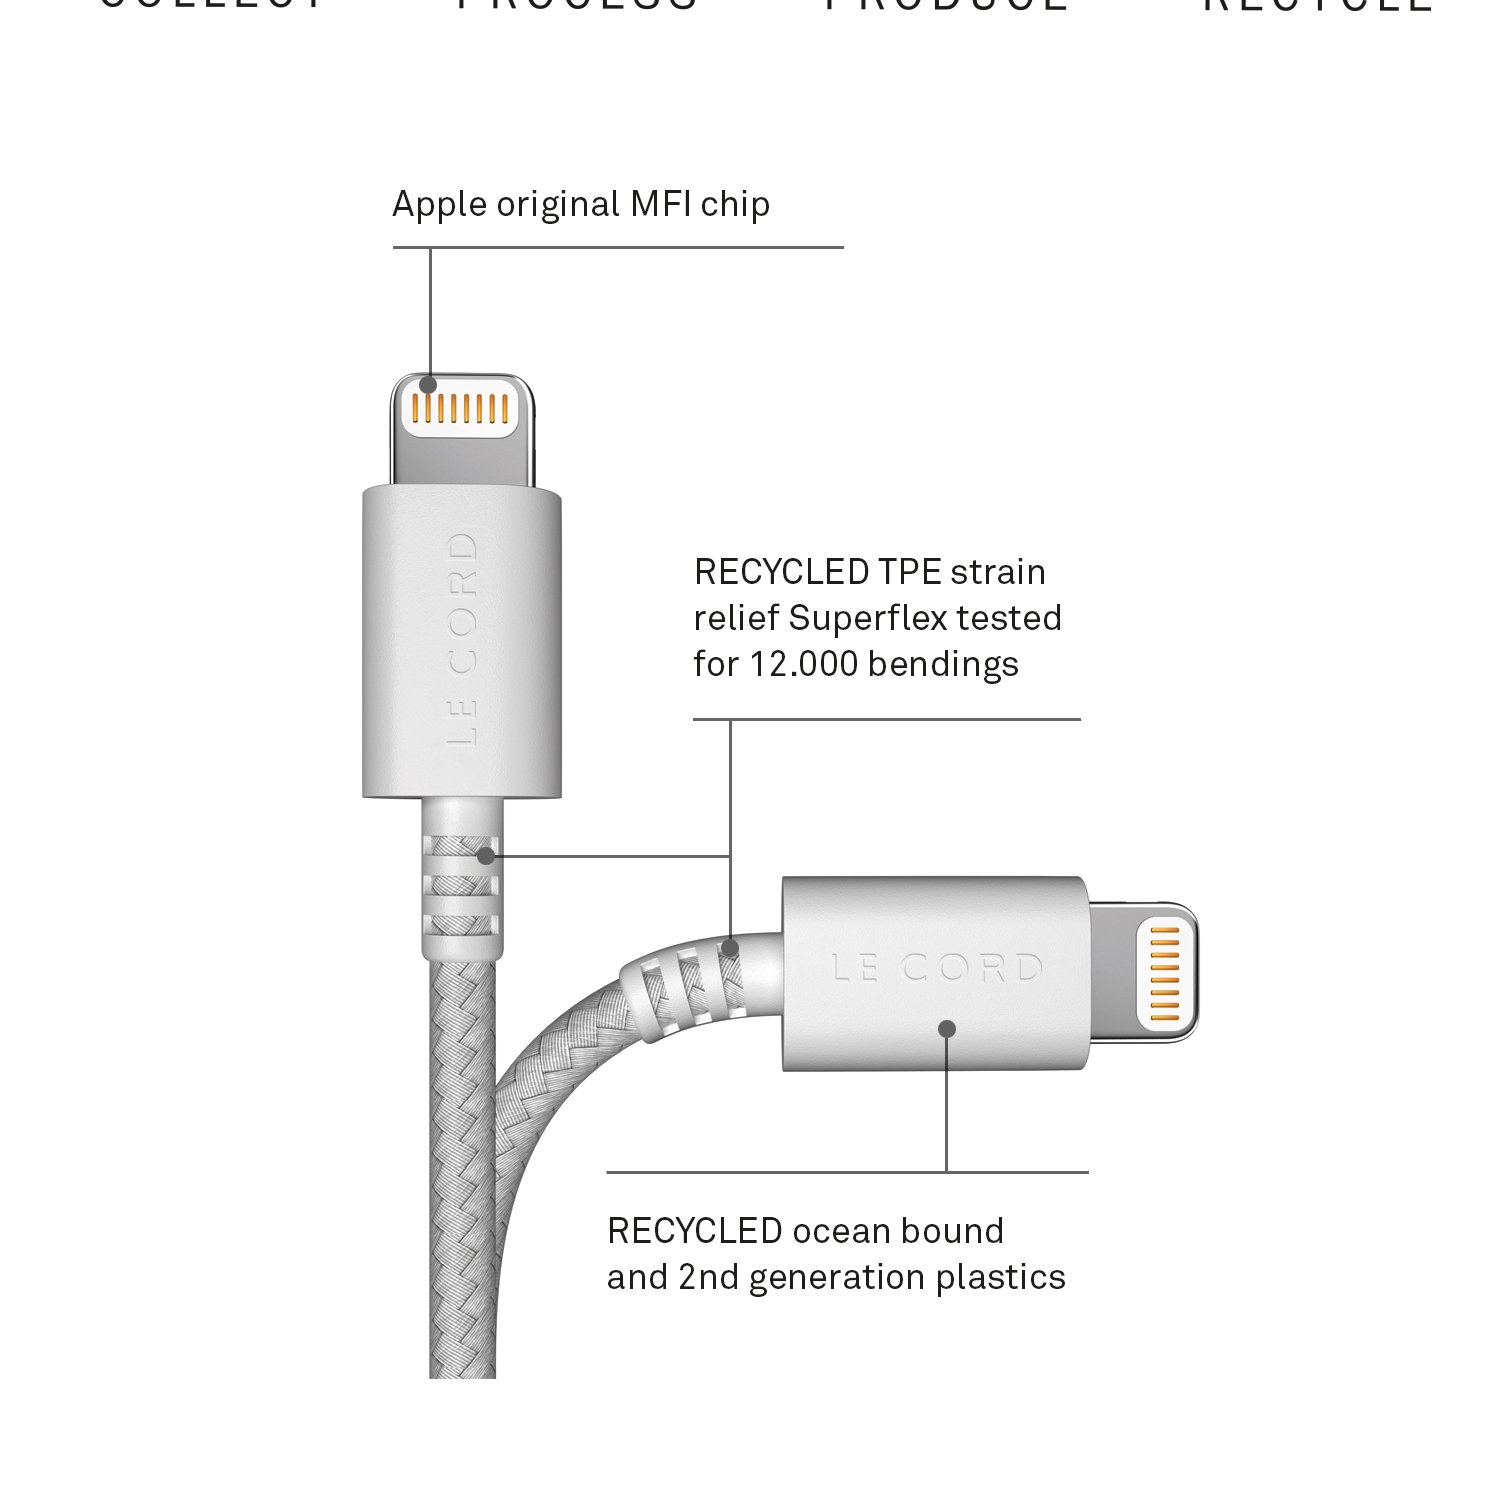 LE CORD Plum iPhone recyceltes Lightning Kabel